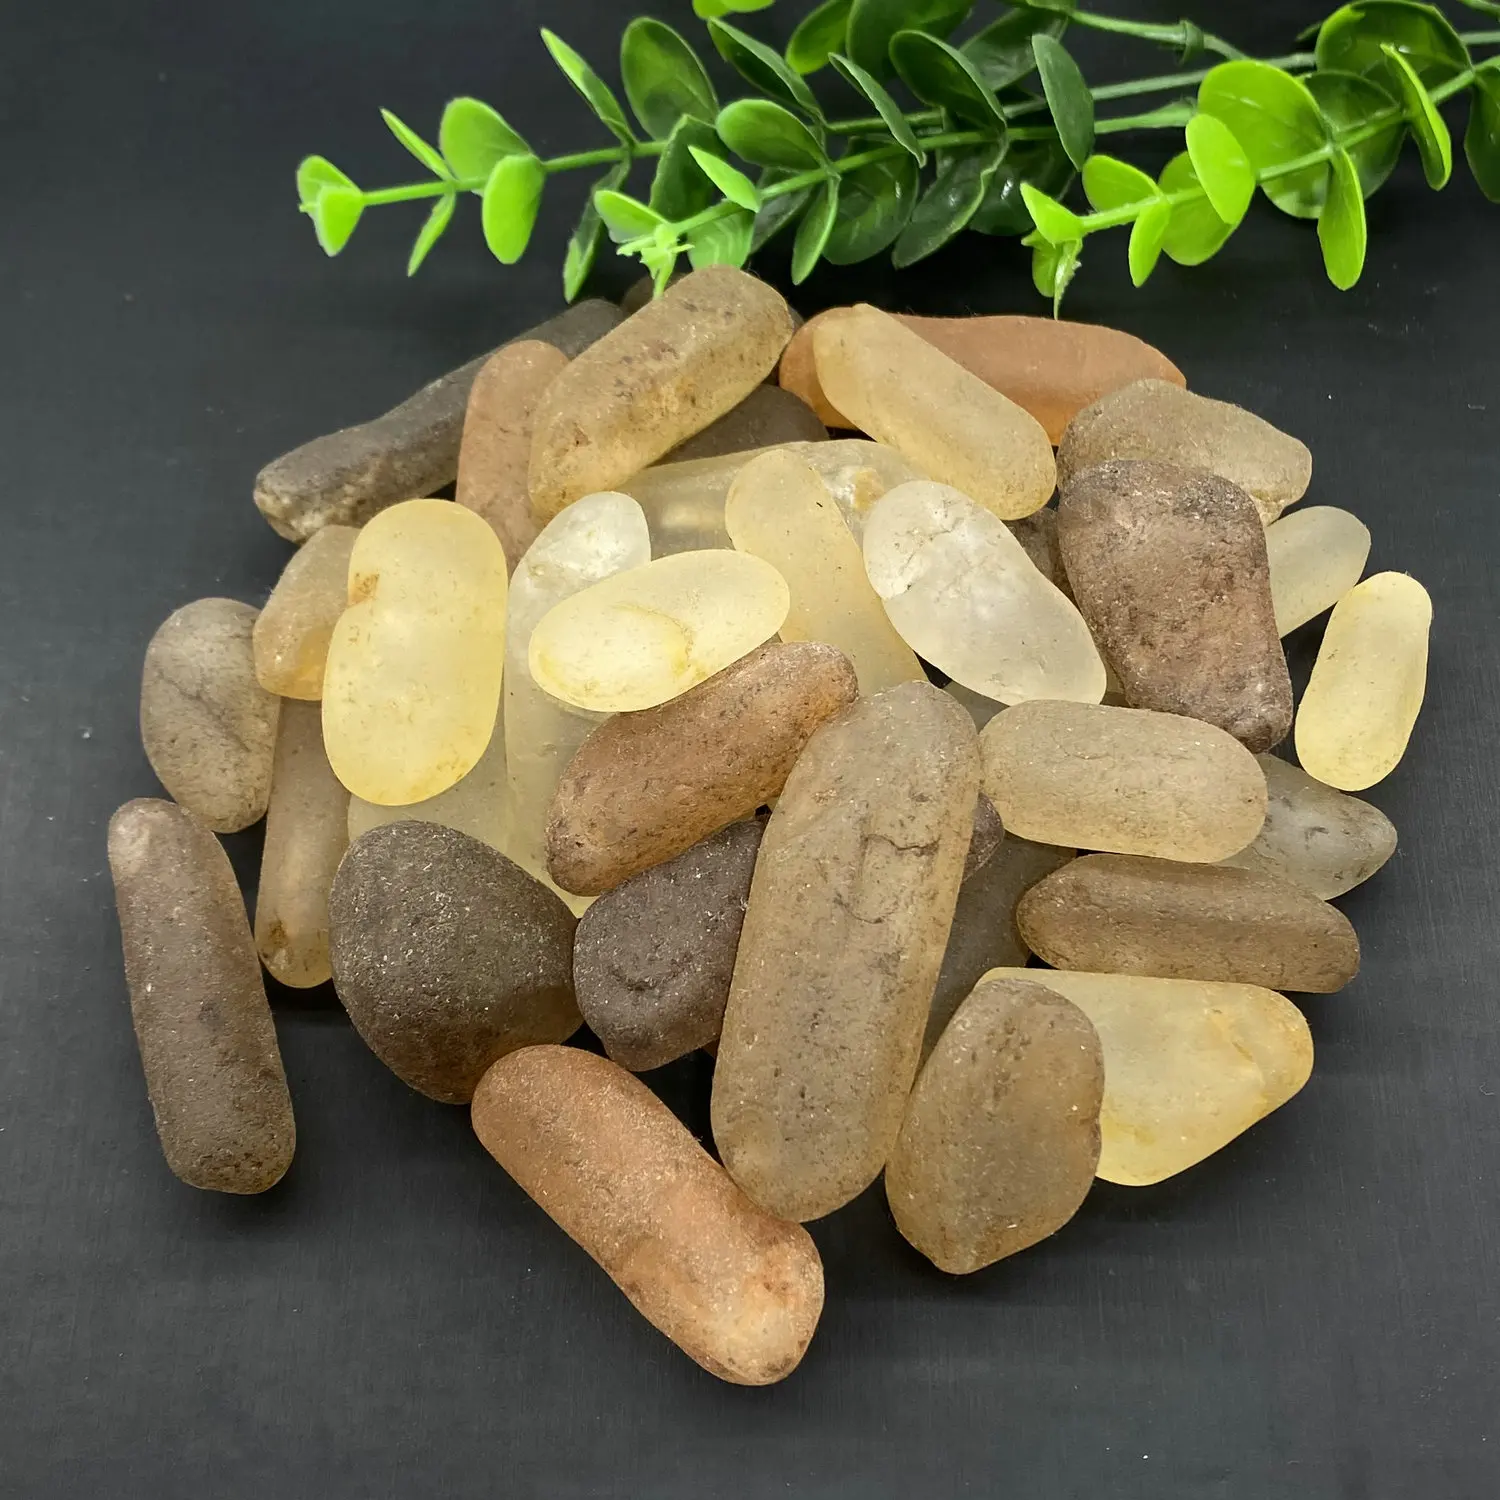 

20-30mm 100g Natural Crystal Raw Stone Strip Mineral Specimen Reiki Healing Home Decorating Gift